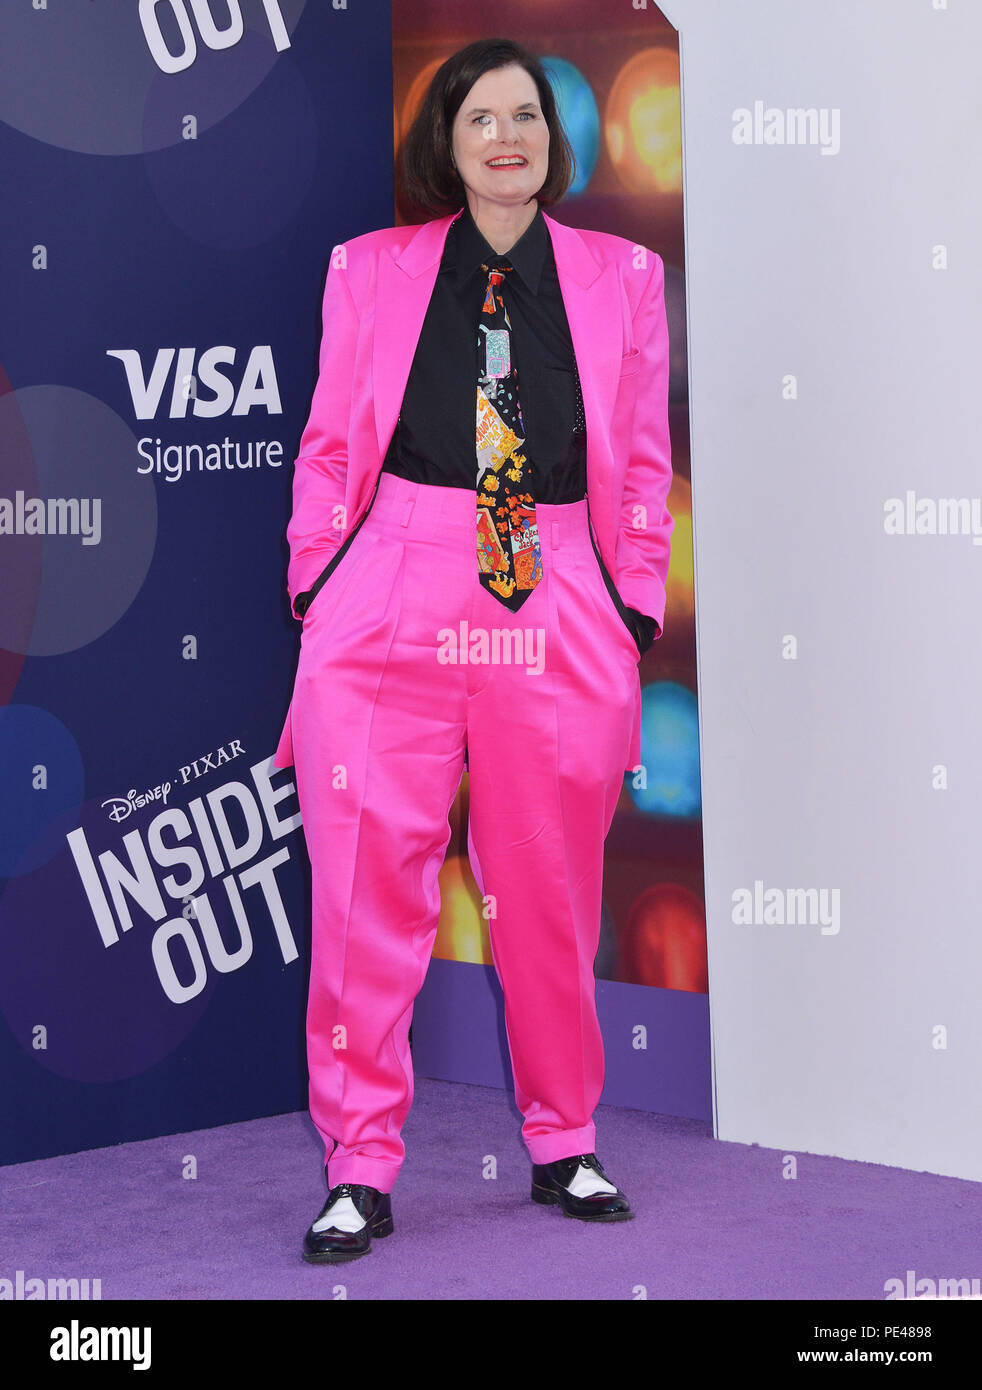 paula poundstone 104 at the  Inside Out Premiere at the El Capitan Theatre in Los Angeles. June, 8, 2015.paula poundstone 104  Event in Hollywood Life - California, Red Carpet Event, USA, Film Industry, Celebrities, Photography, Bestof, Arts Culture and Entertainment, Topix Celebrities fashion, Best of, Hollywood Life, Event in Hollywood Life - California, Red Carpet and backstage, movie celebrities, TV celebrities, Music celebrities, Topix, Bestof, Arts Culture and Entertainment, vertical, one person, Photography,   Fashion, full length, 2015 inquiry tsuni@Gamma-USA.com , Credit Tsuni / USA, Stock Photo